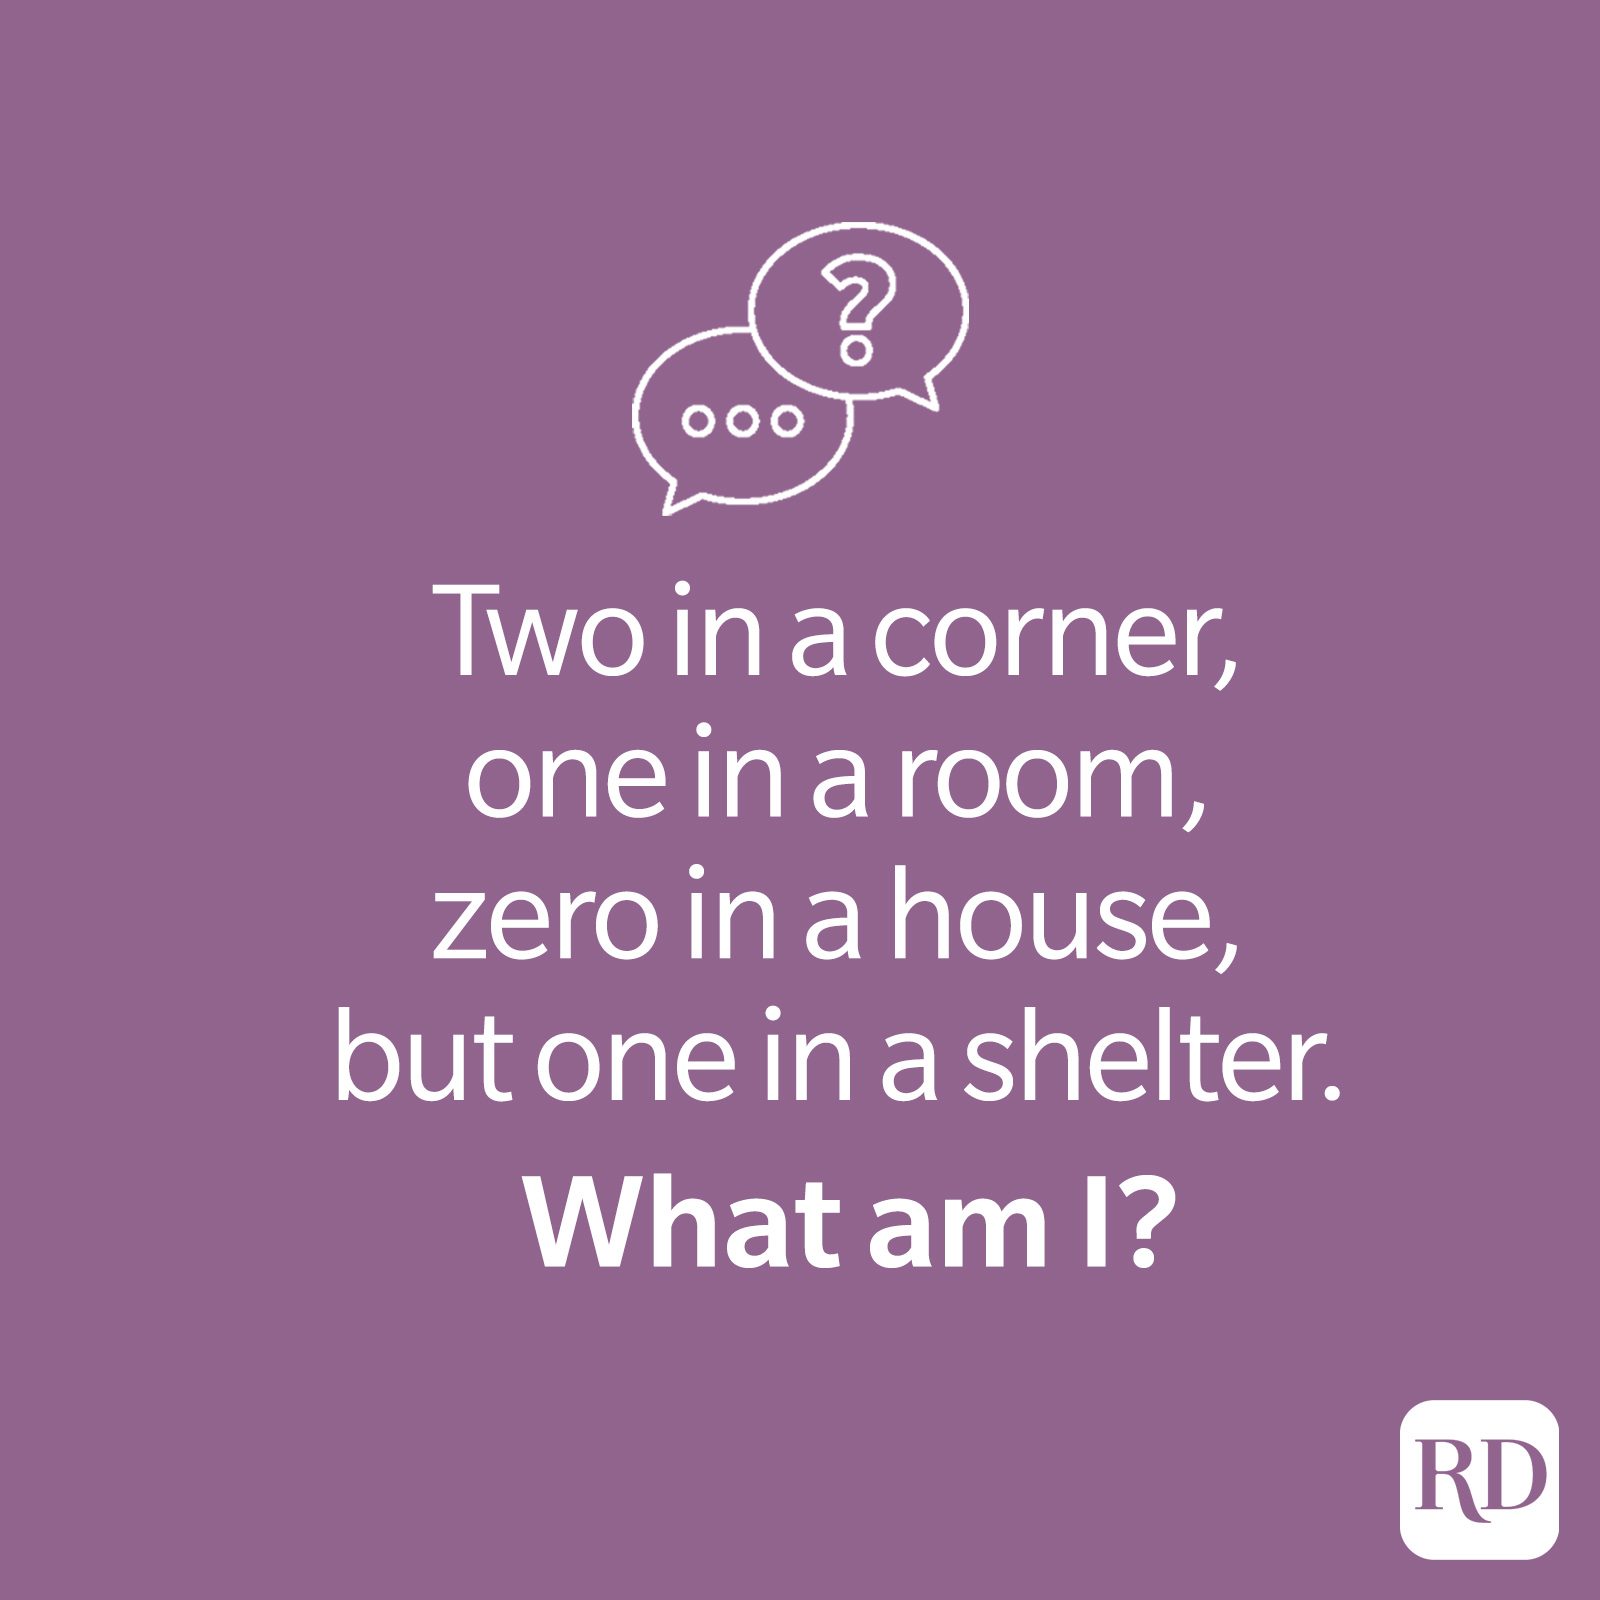 20 Hard Riddles for Adults: Best Brain Teasers for Adults